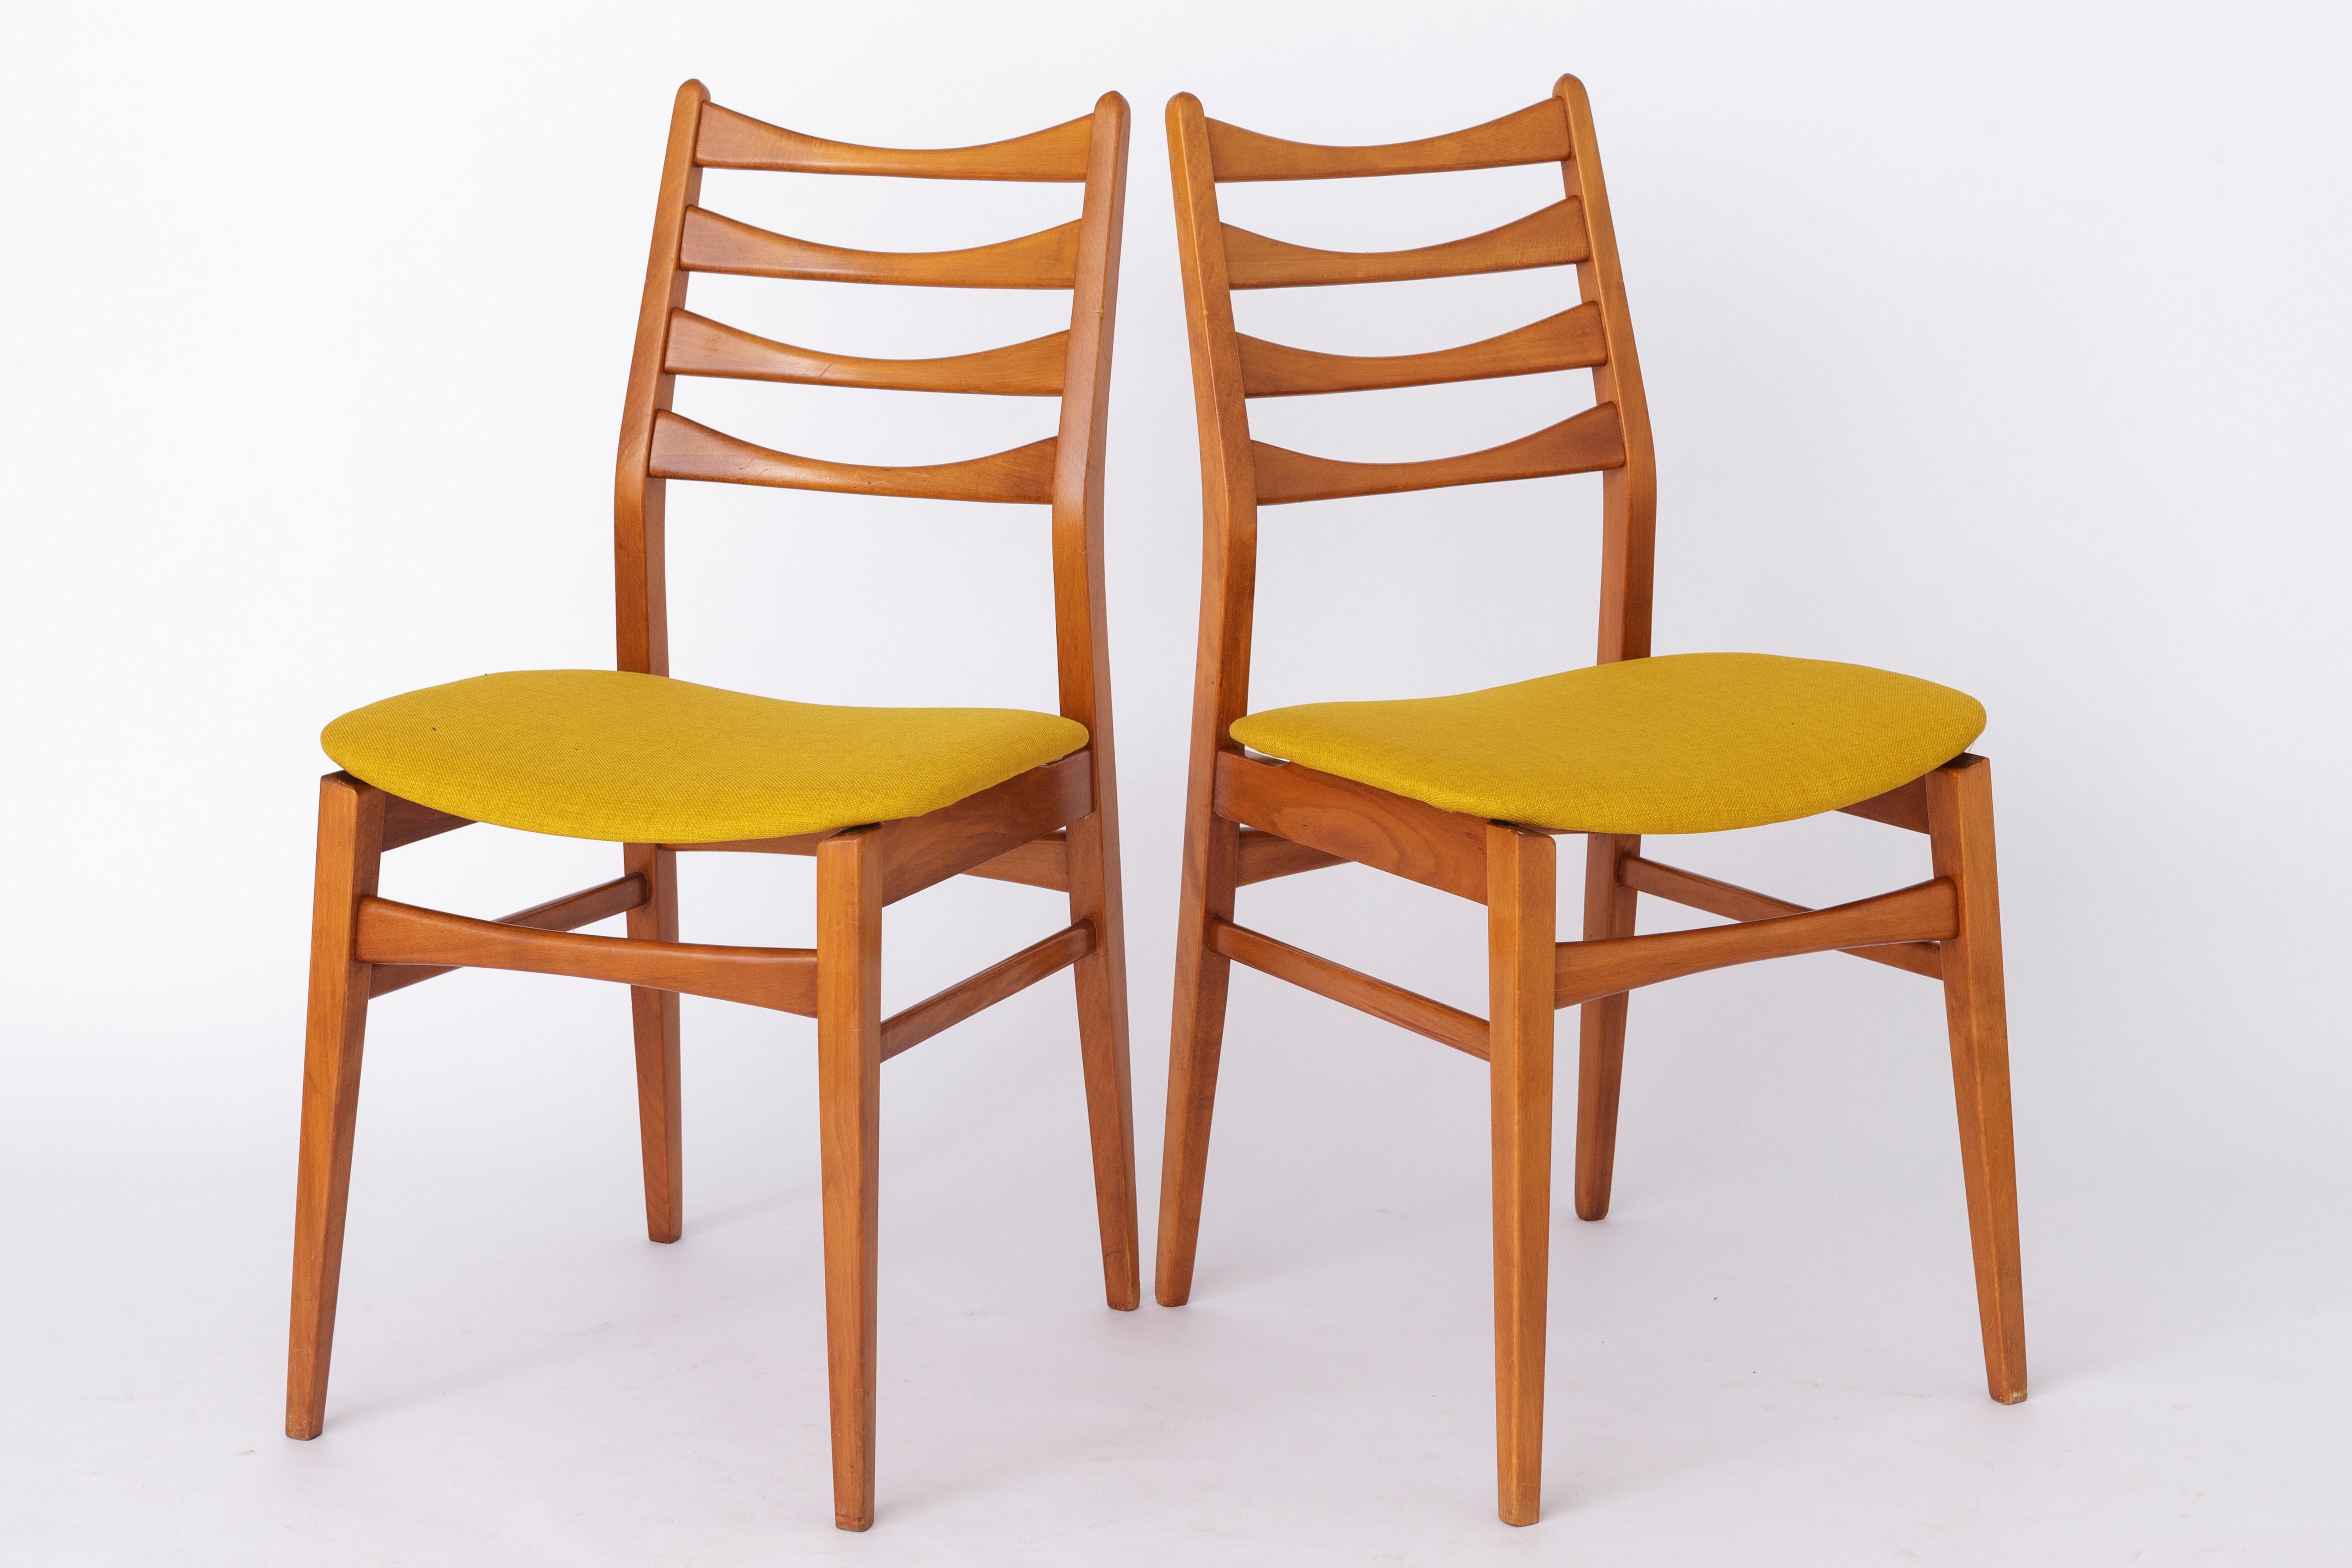 Pair of German vintage chairs. Production period approx. 1960s-1970s. 
Unknown manufacturer. 
Displayed price is for a pair. Totally up to 4 chairs (2 pairs) available. 

Sturdy beech wood frame. Refurbished and oiled. 
Reupholstered with yellow